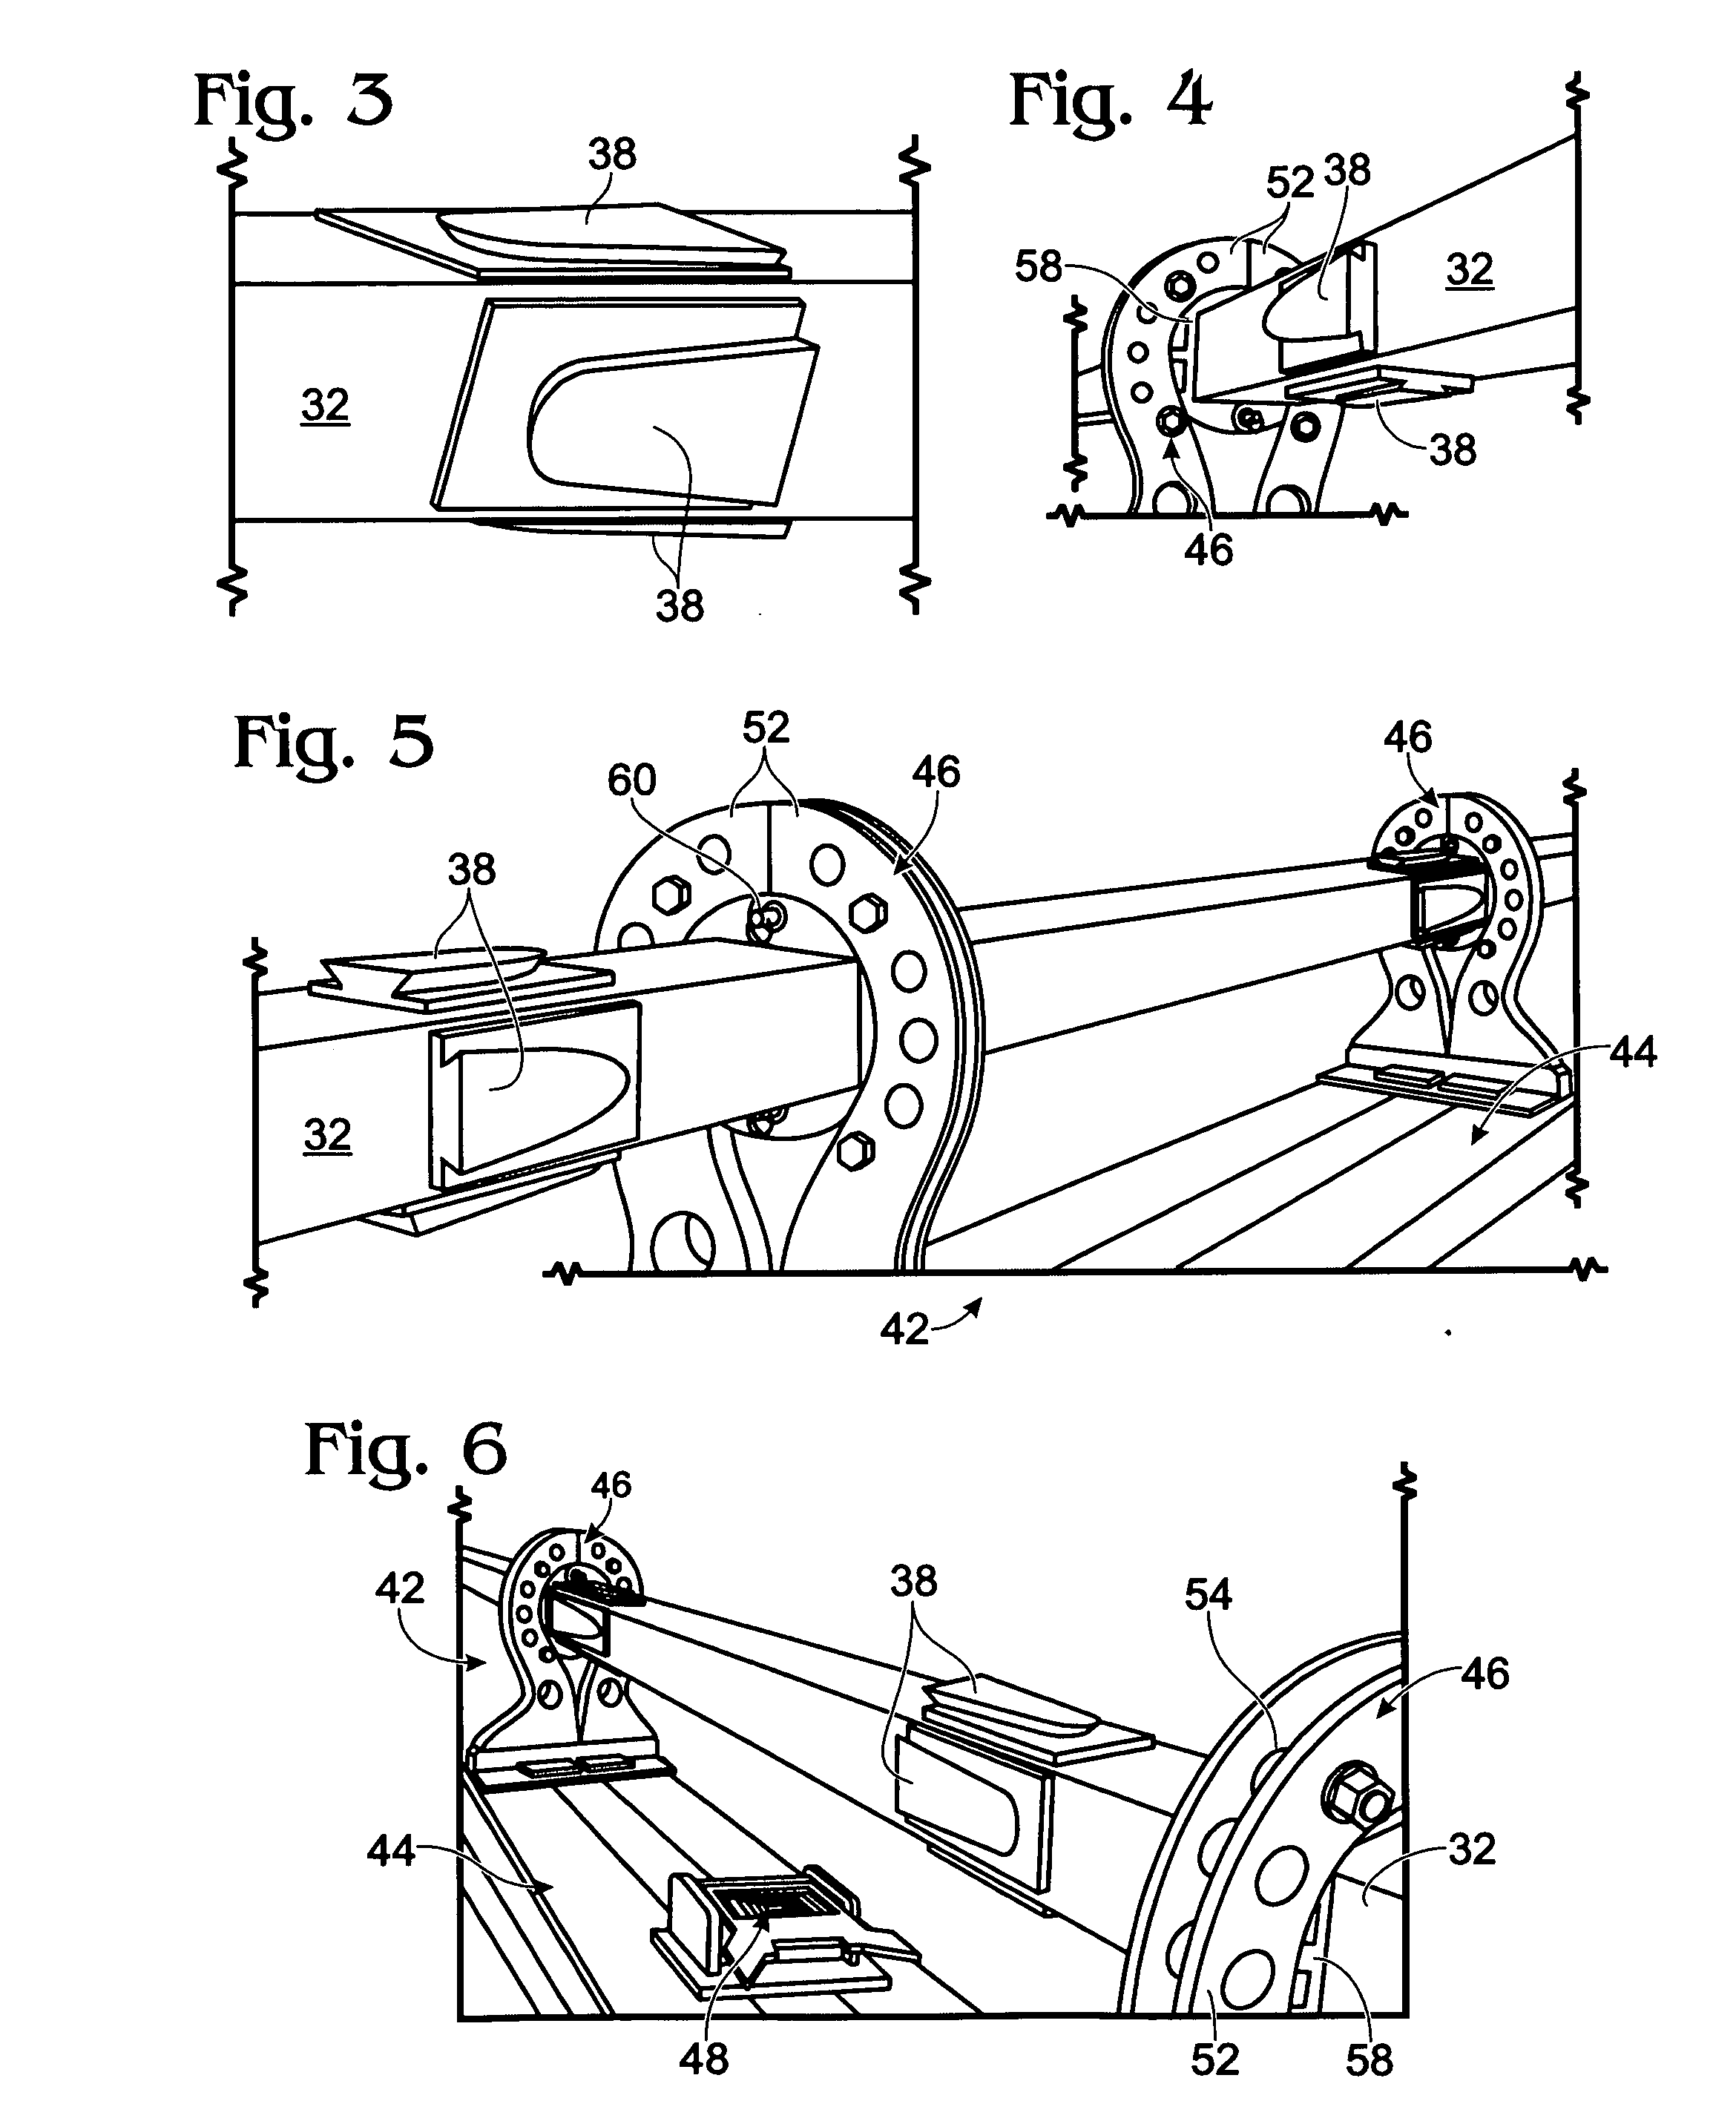 Rotational apparatus for welding beam-mount structure to the side(s) of a column